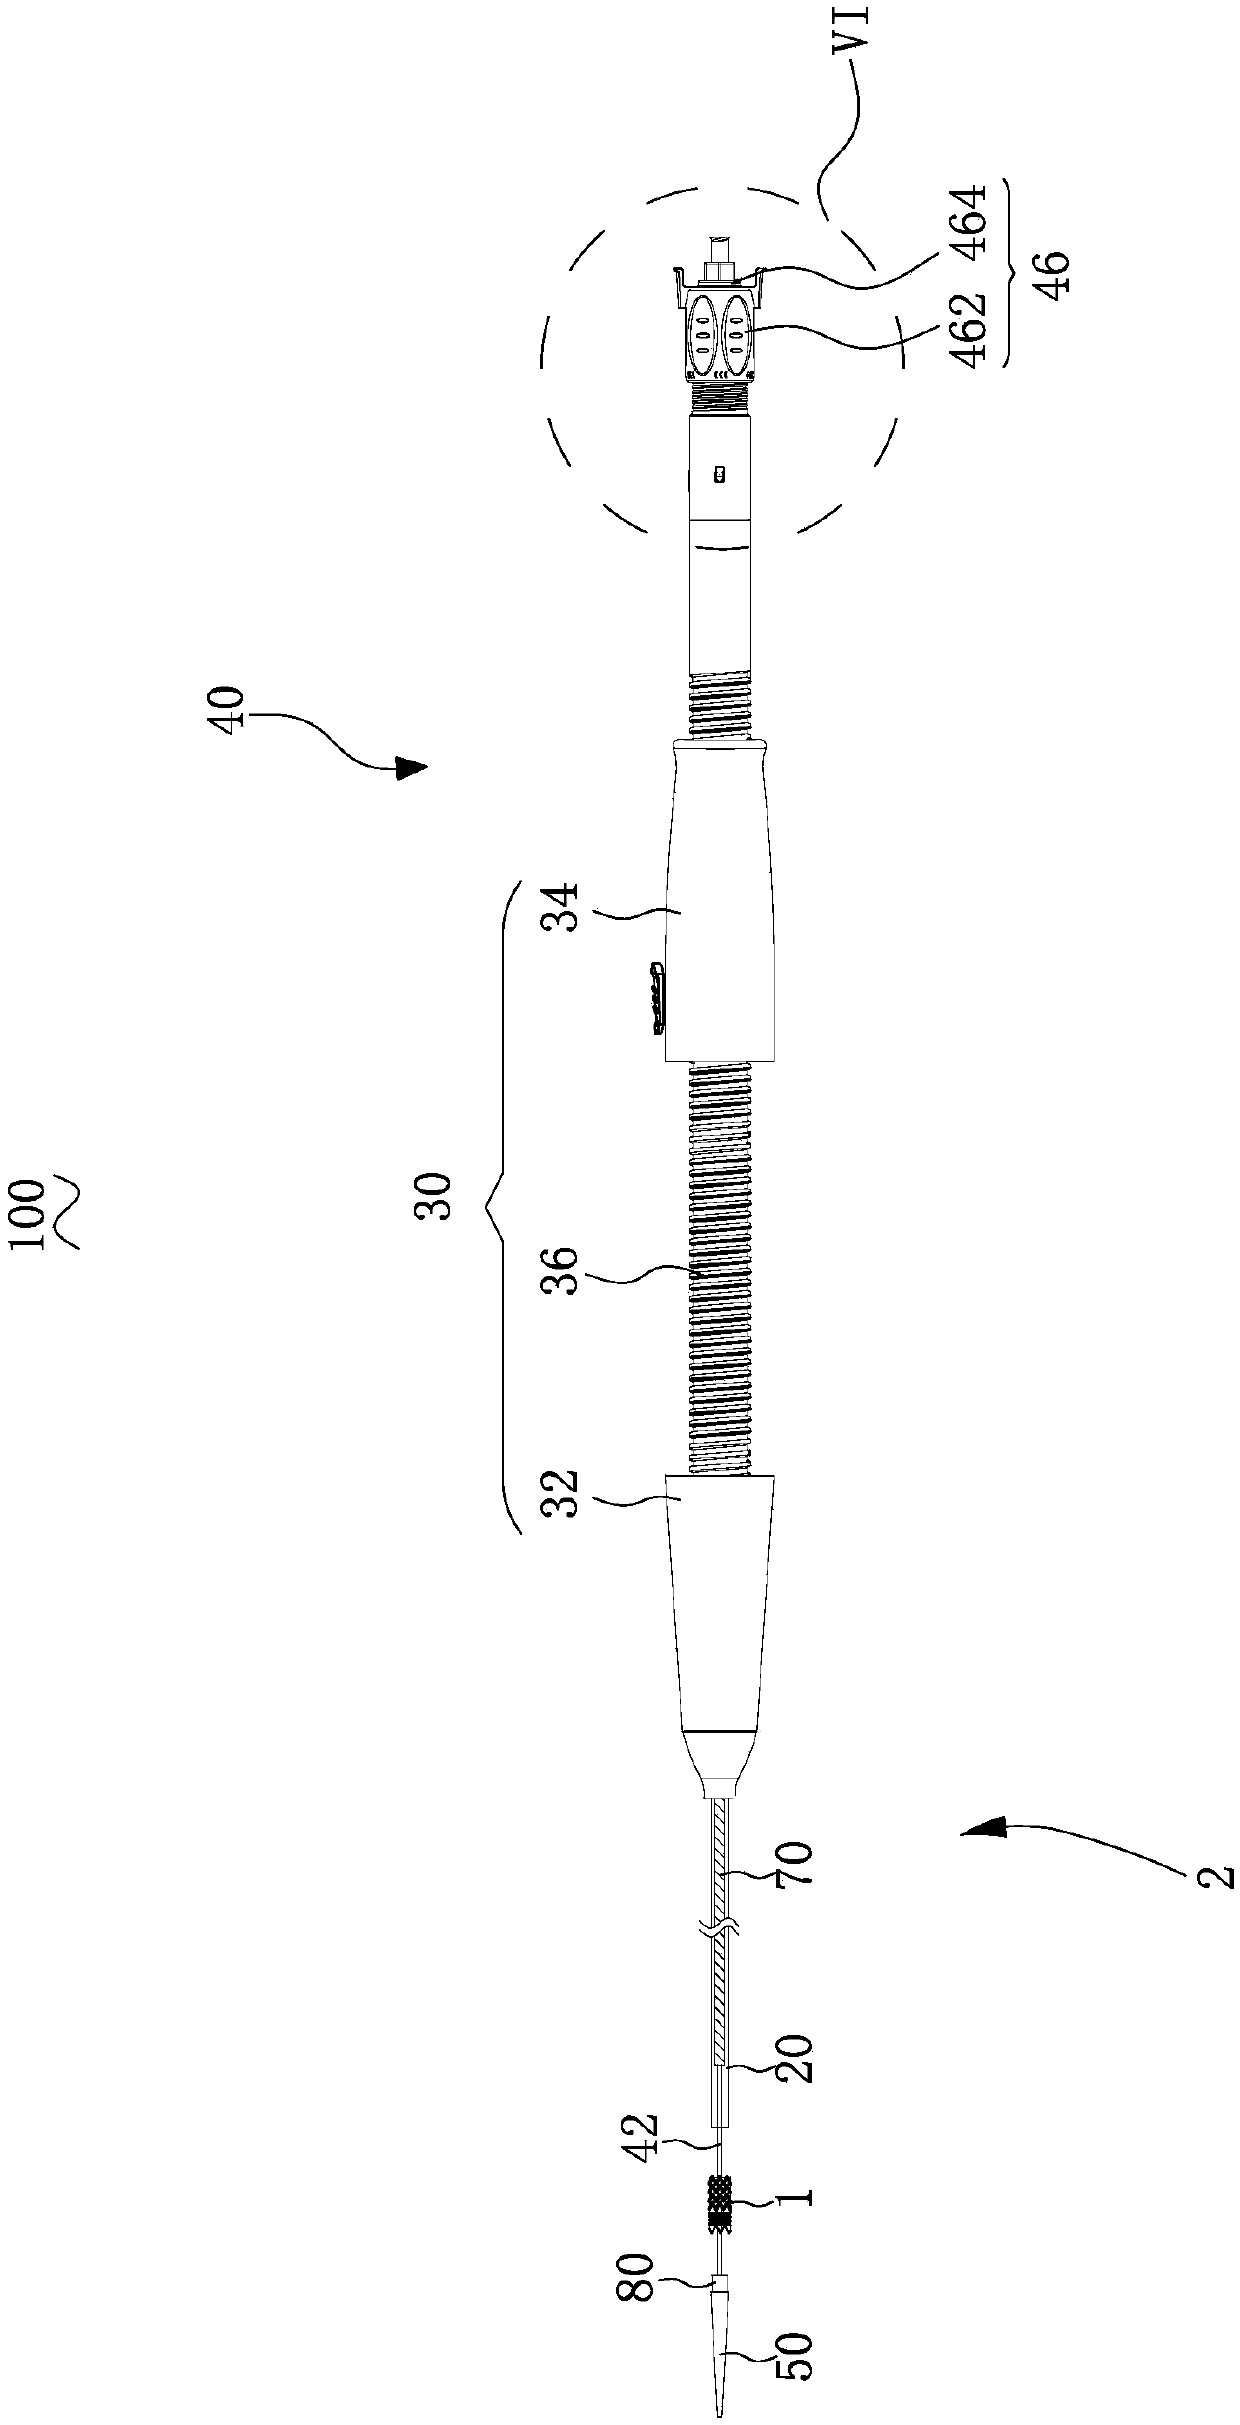 Release assembly of implantation instrument, implantation instrument conveyor and implantation instrument conveying system